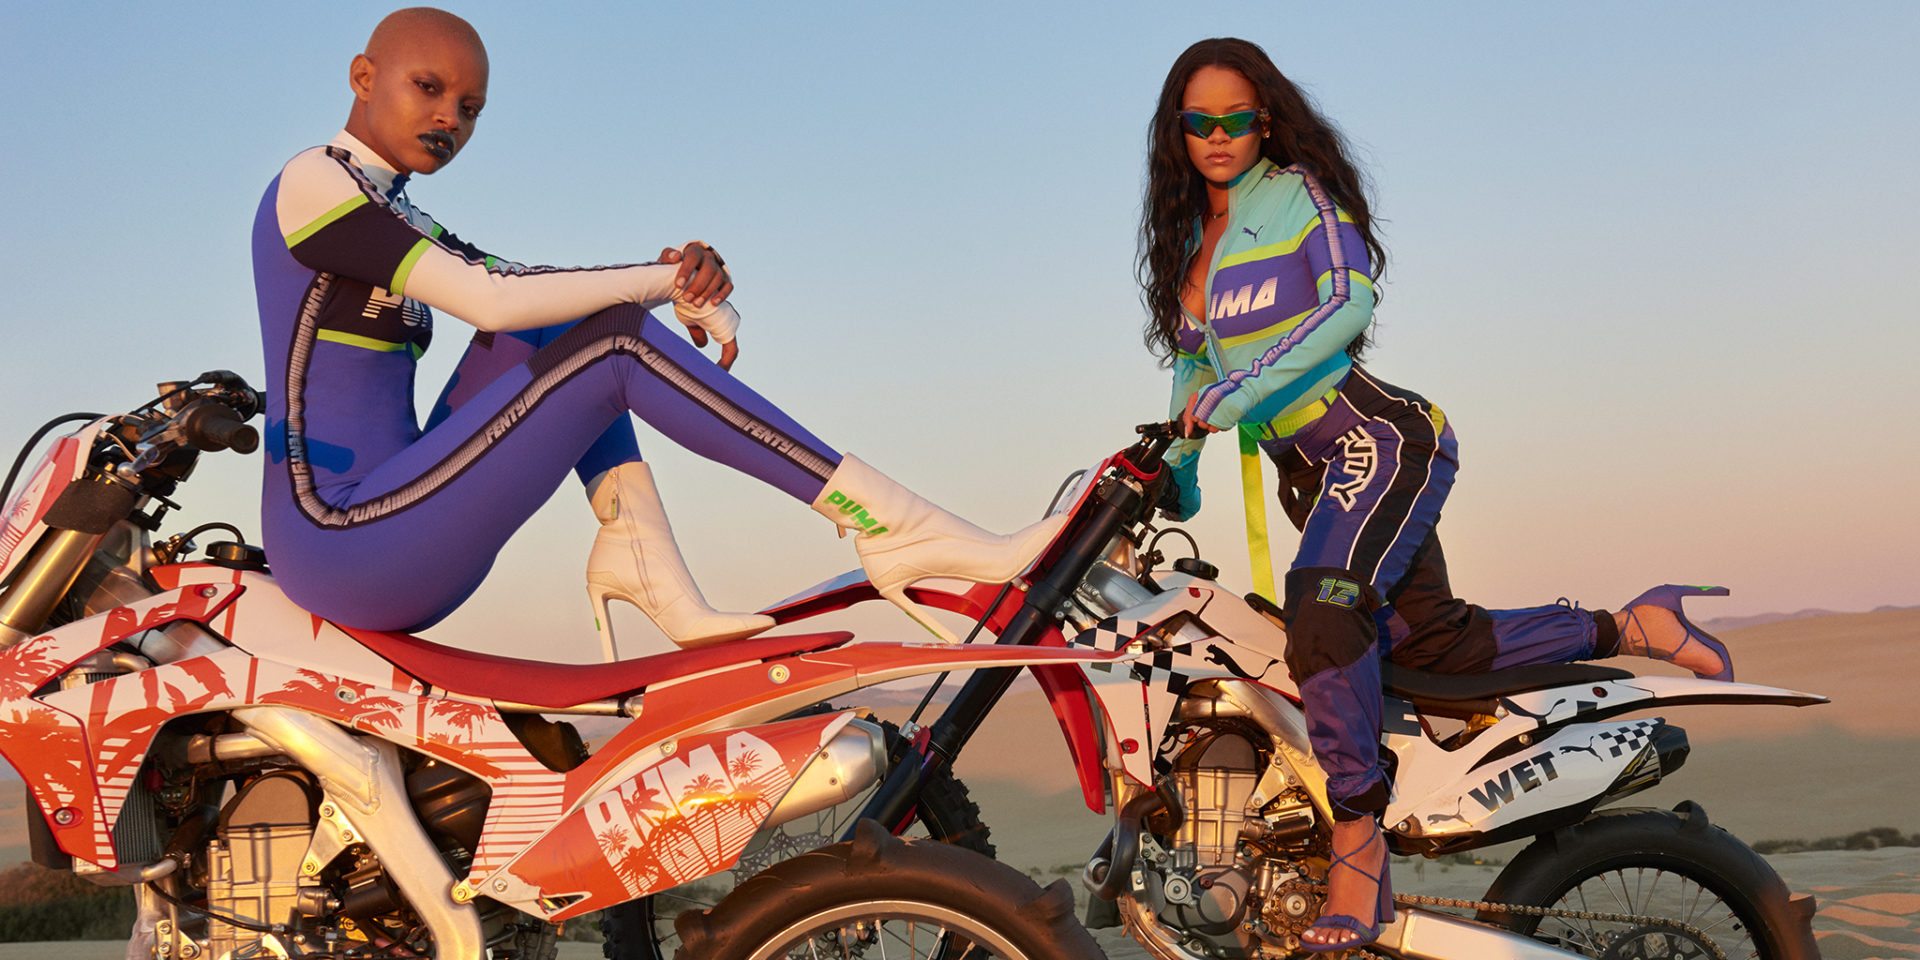 Rihanna and a girl on the motorcycles